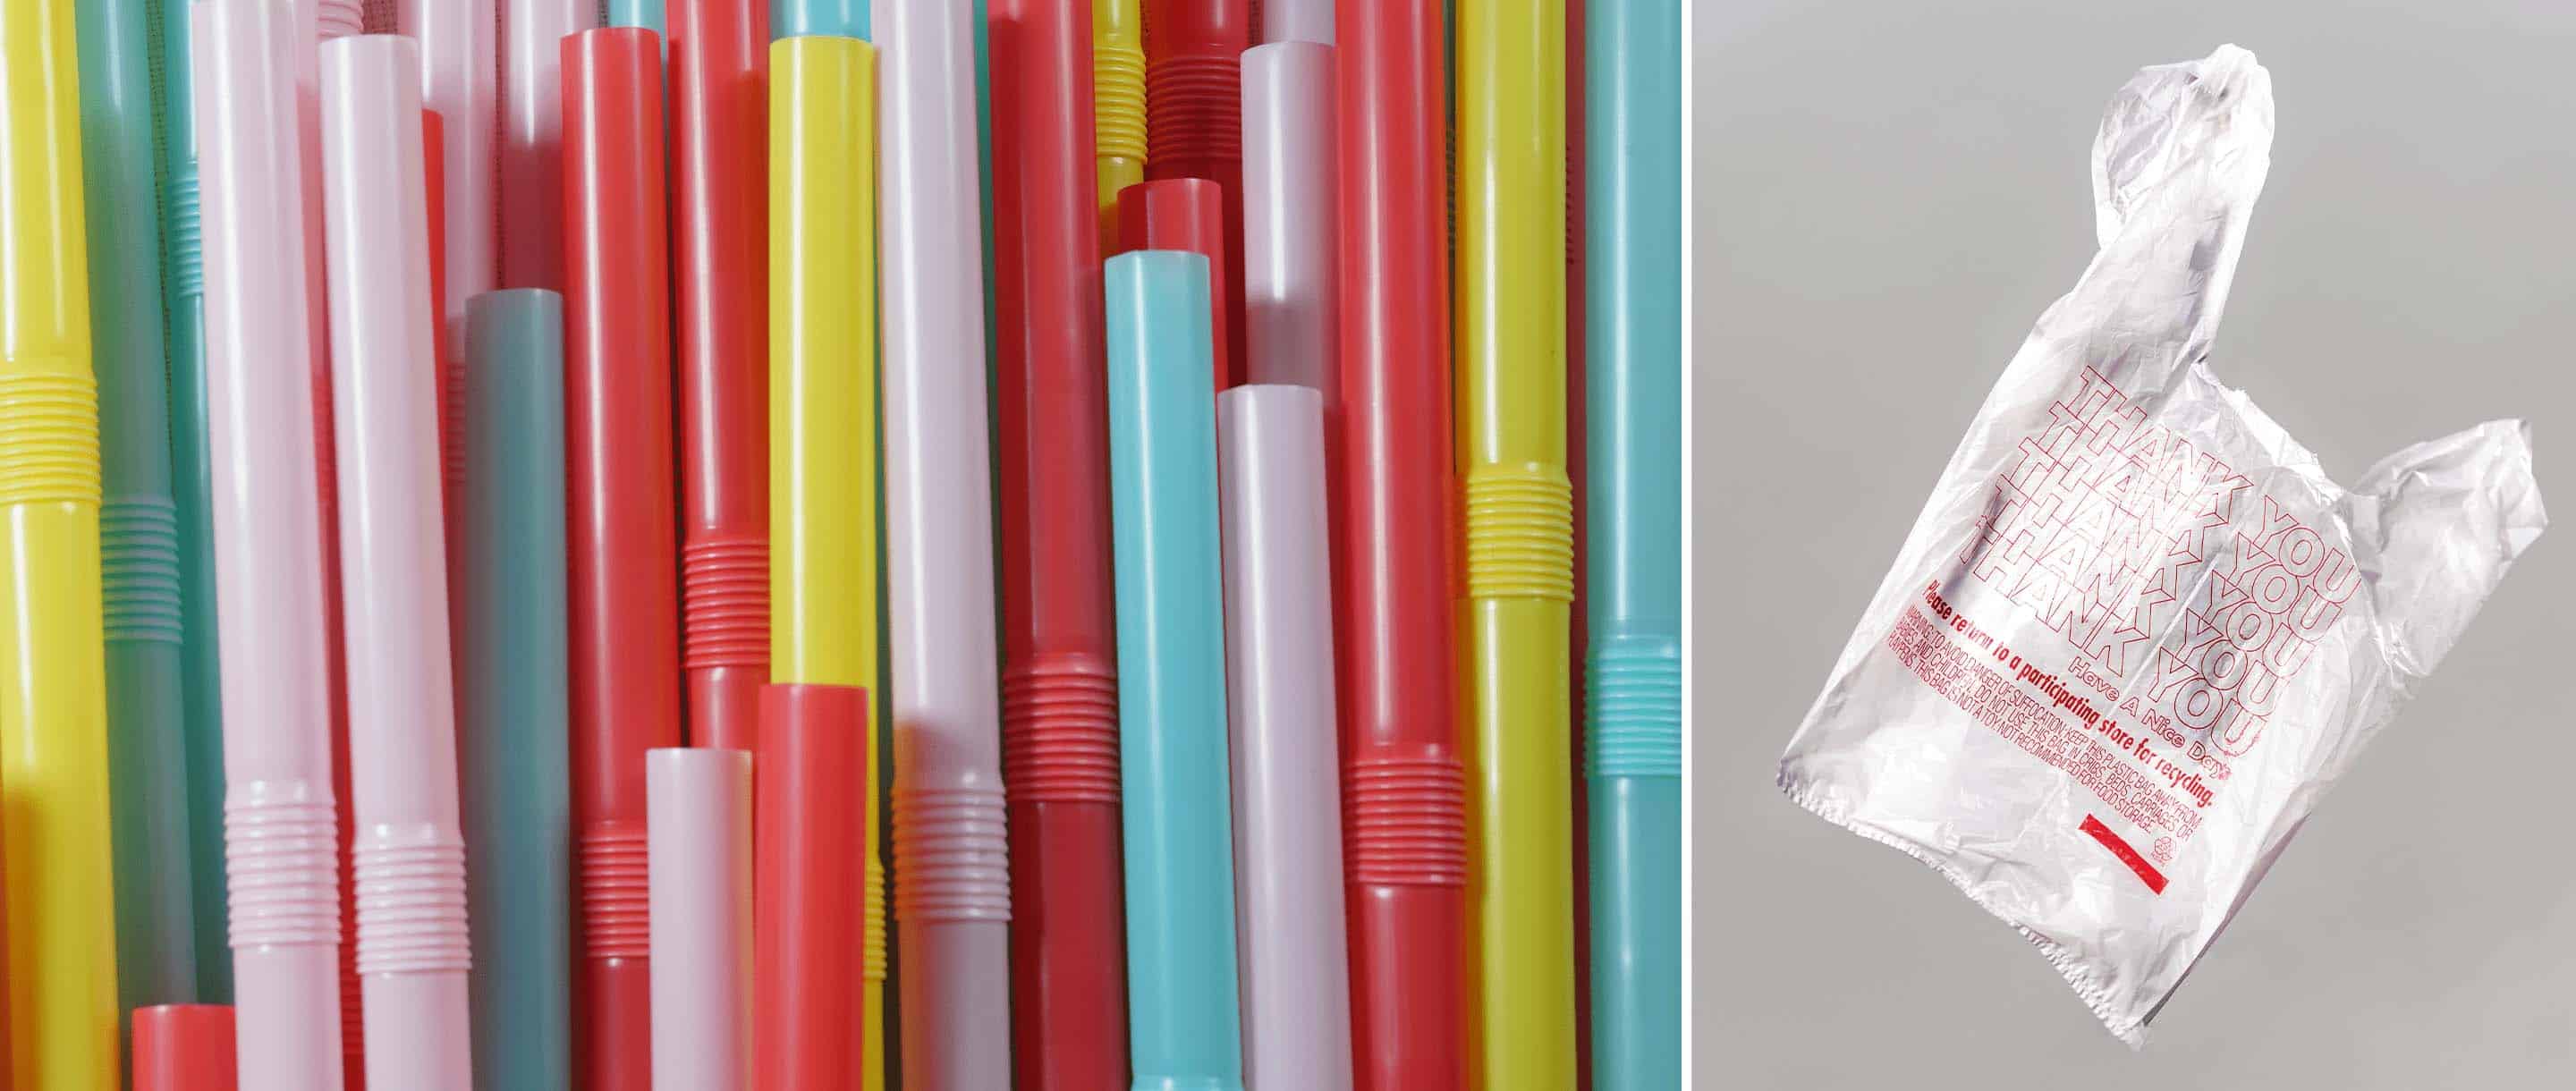 An image depicting plastic straws and a plastic bag.